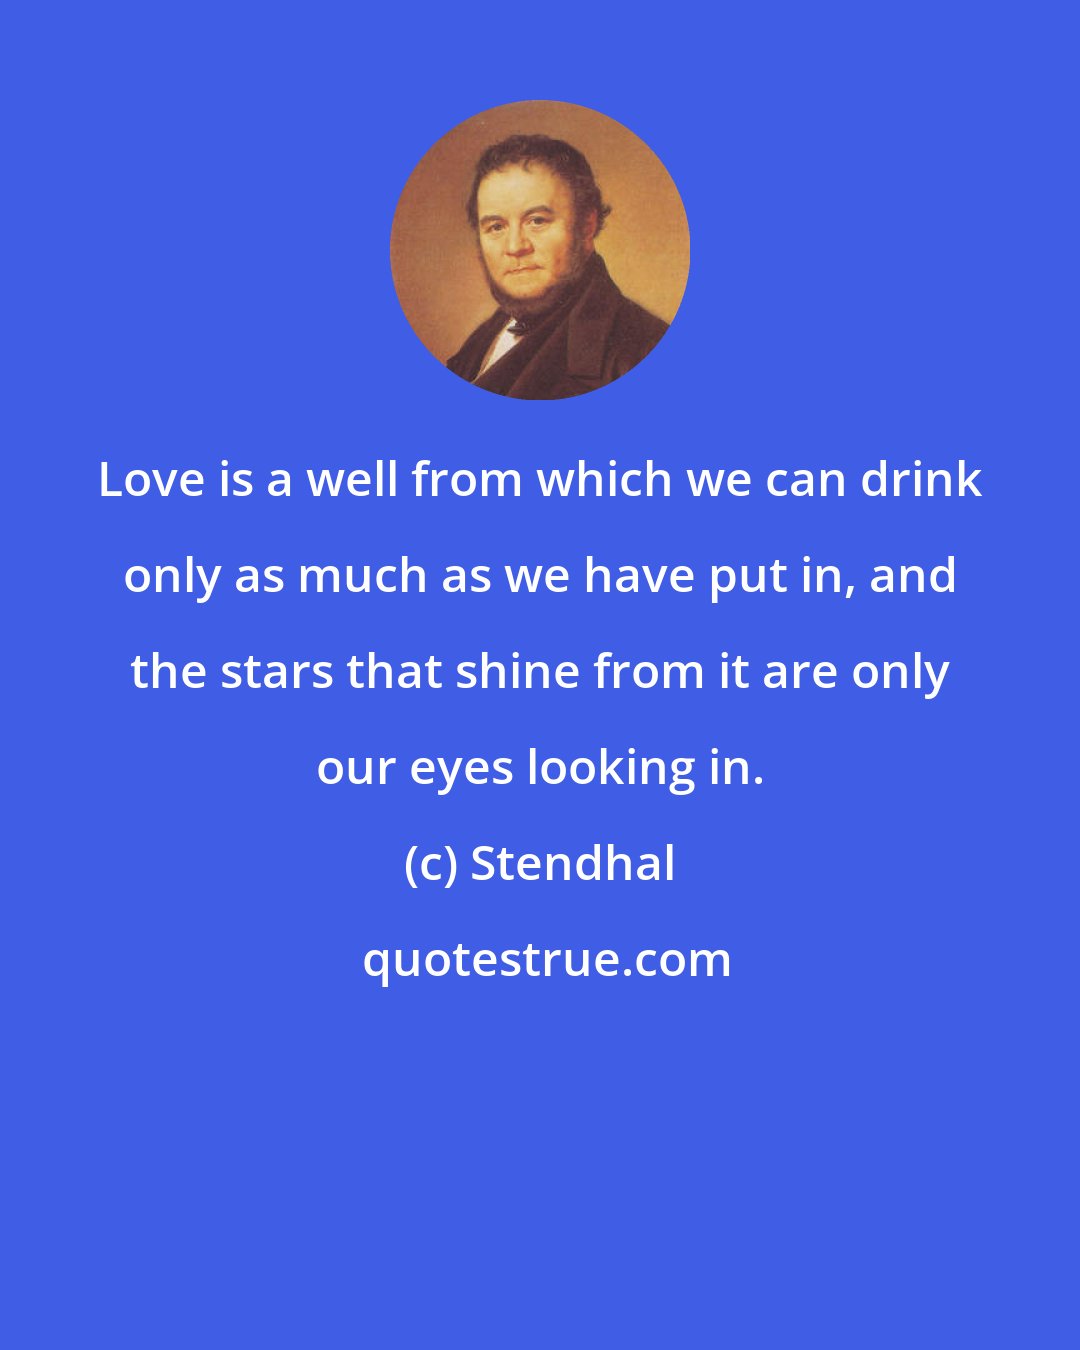 Stendhal: Love is a well from which we can drink only as much as we have put in, and the stars that shine from it are only our eyes looking in.